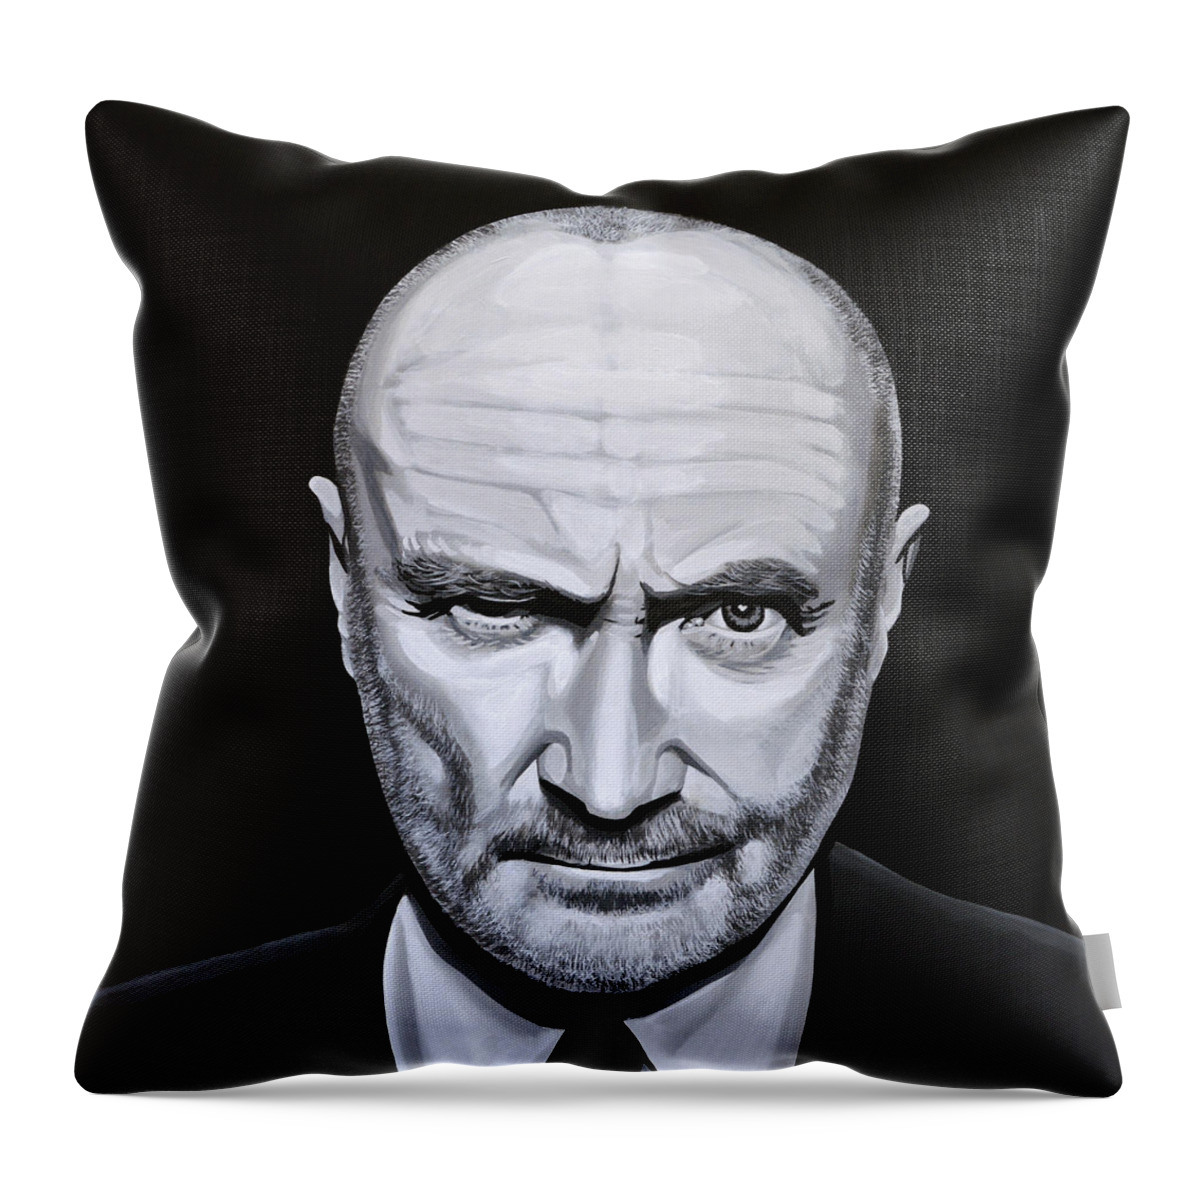 Phil Collins Throw Pillow featuring the painting Phil Collins by Paul Meijering